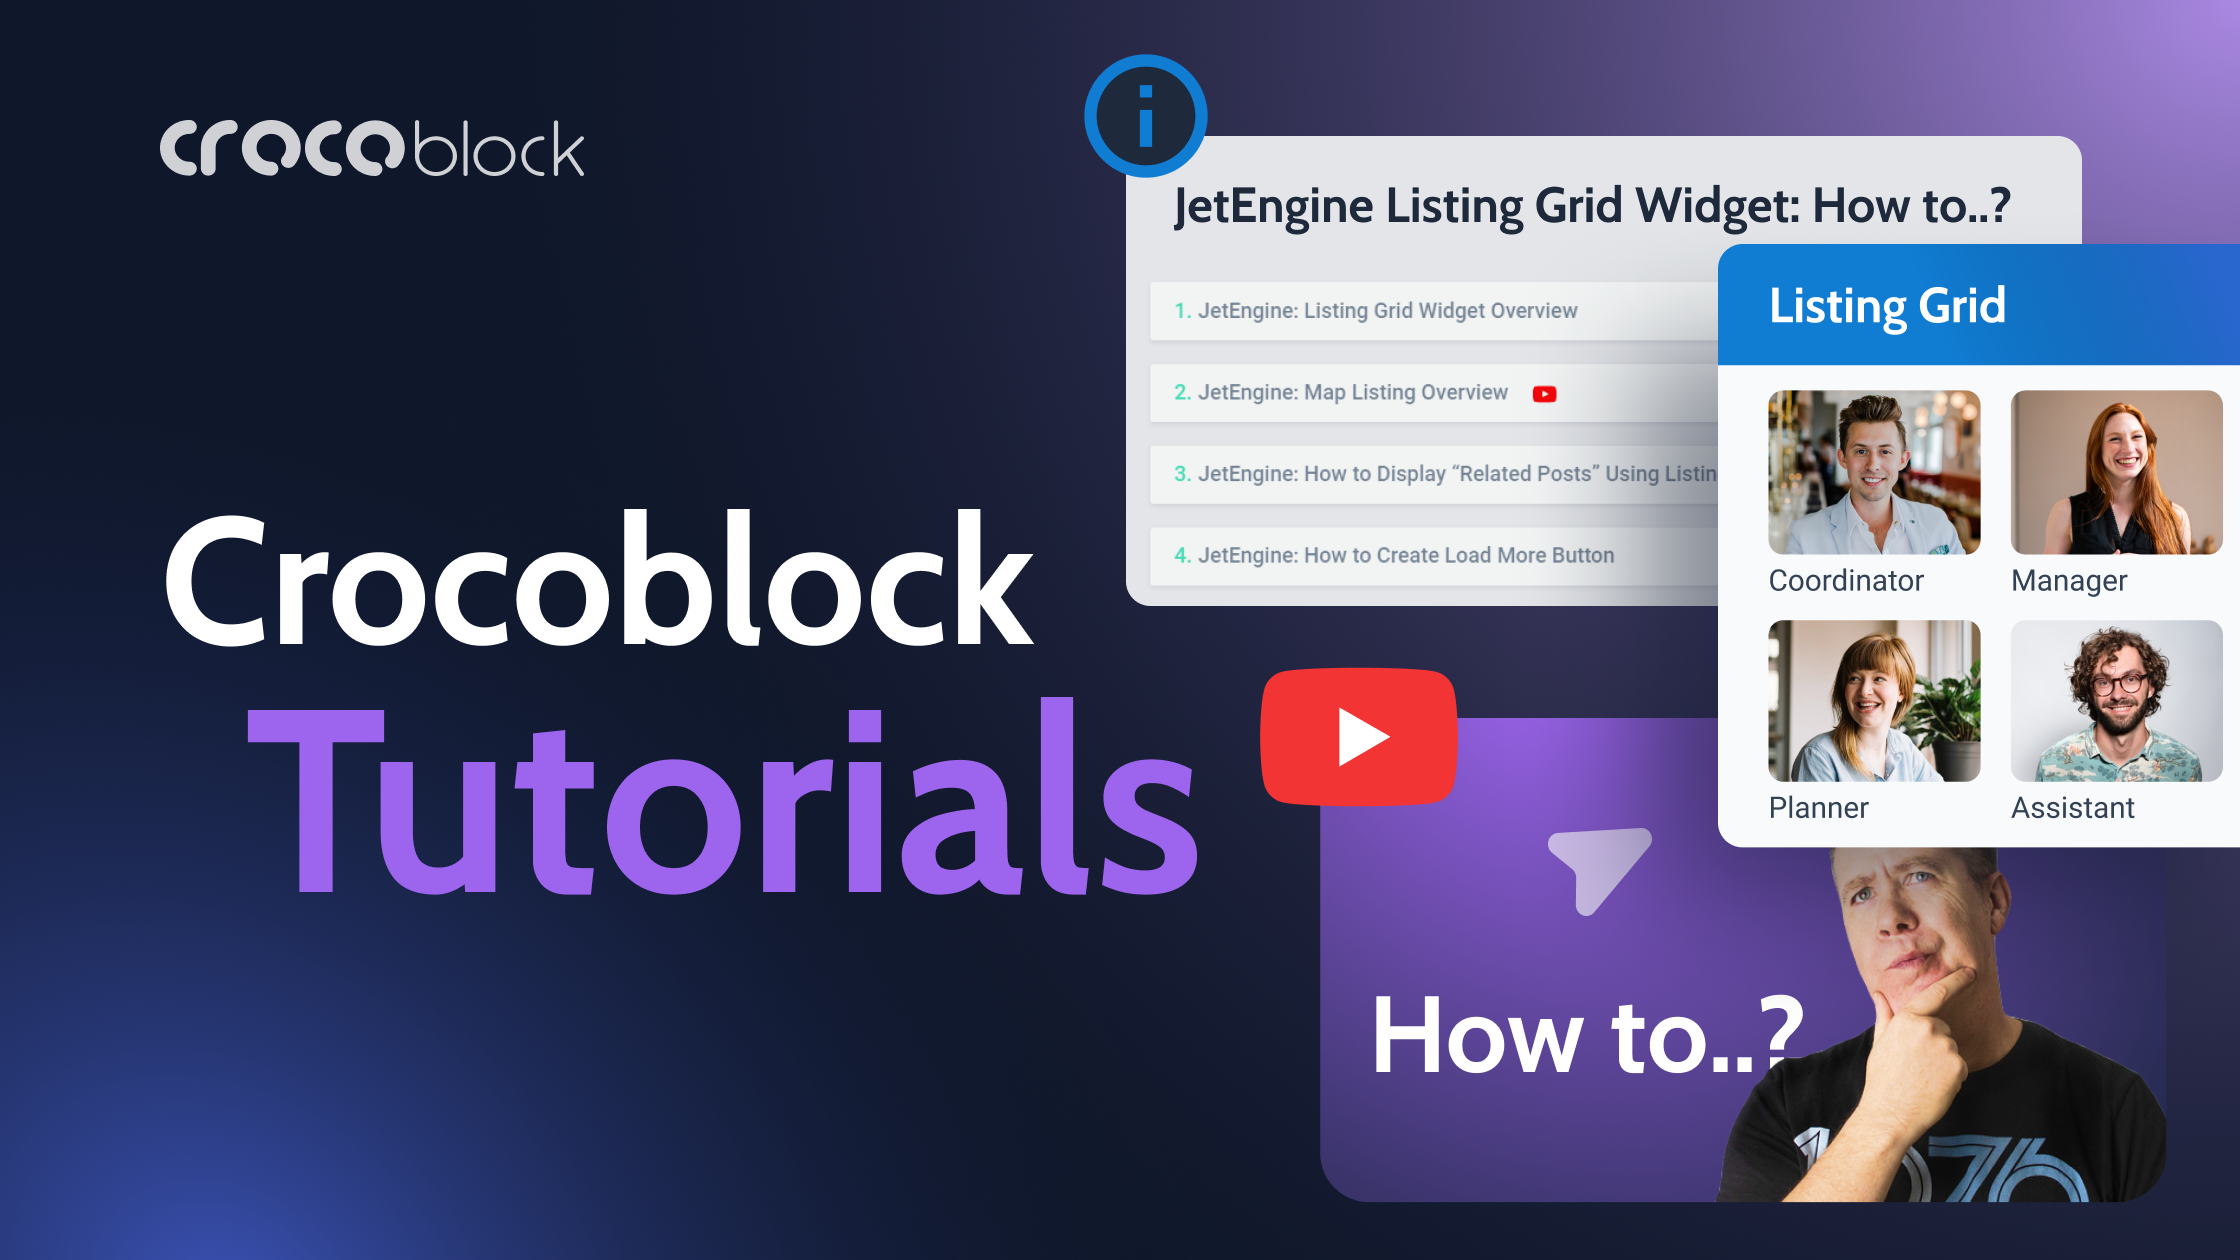 Crocoblock Help Center and How to Use It